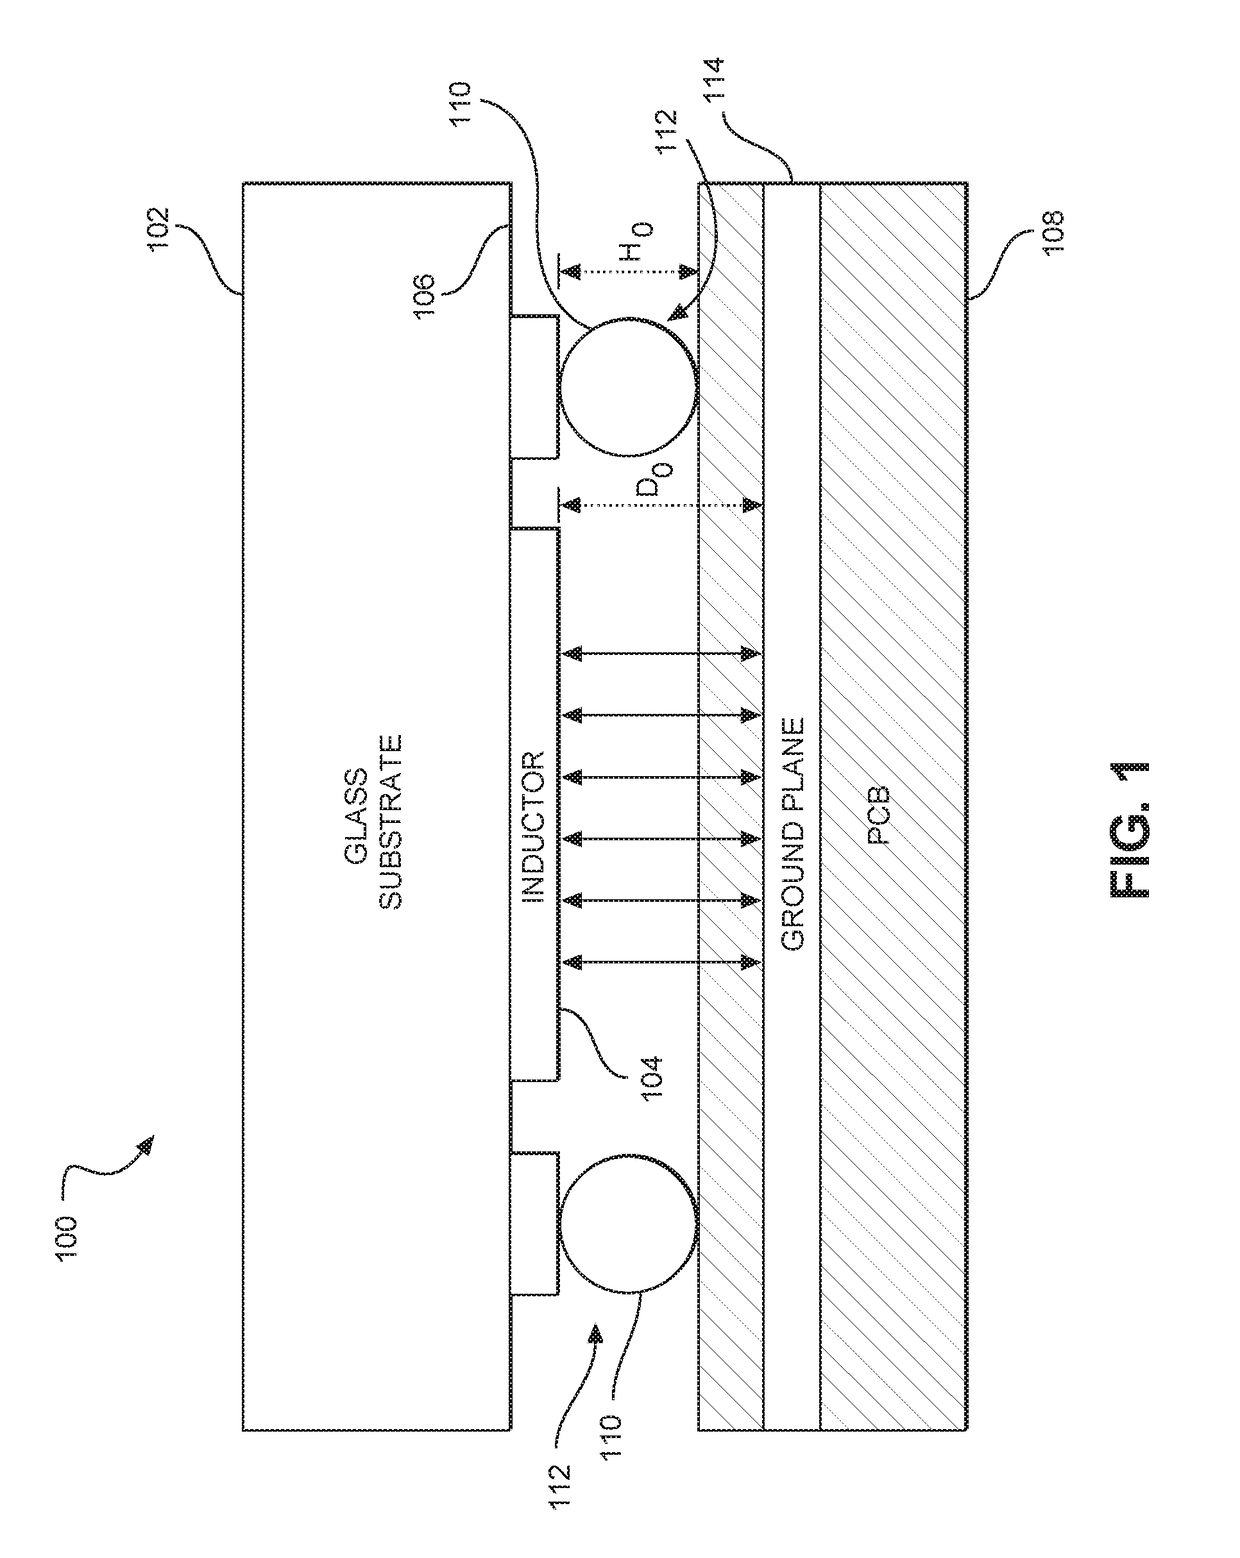 Passive device assembly for accurate ground plane control